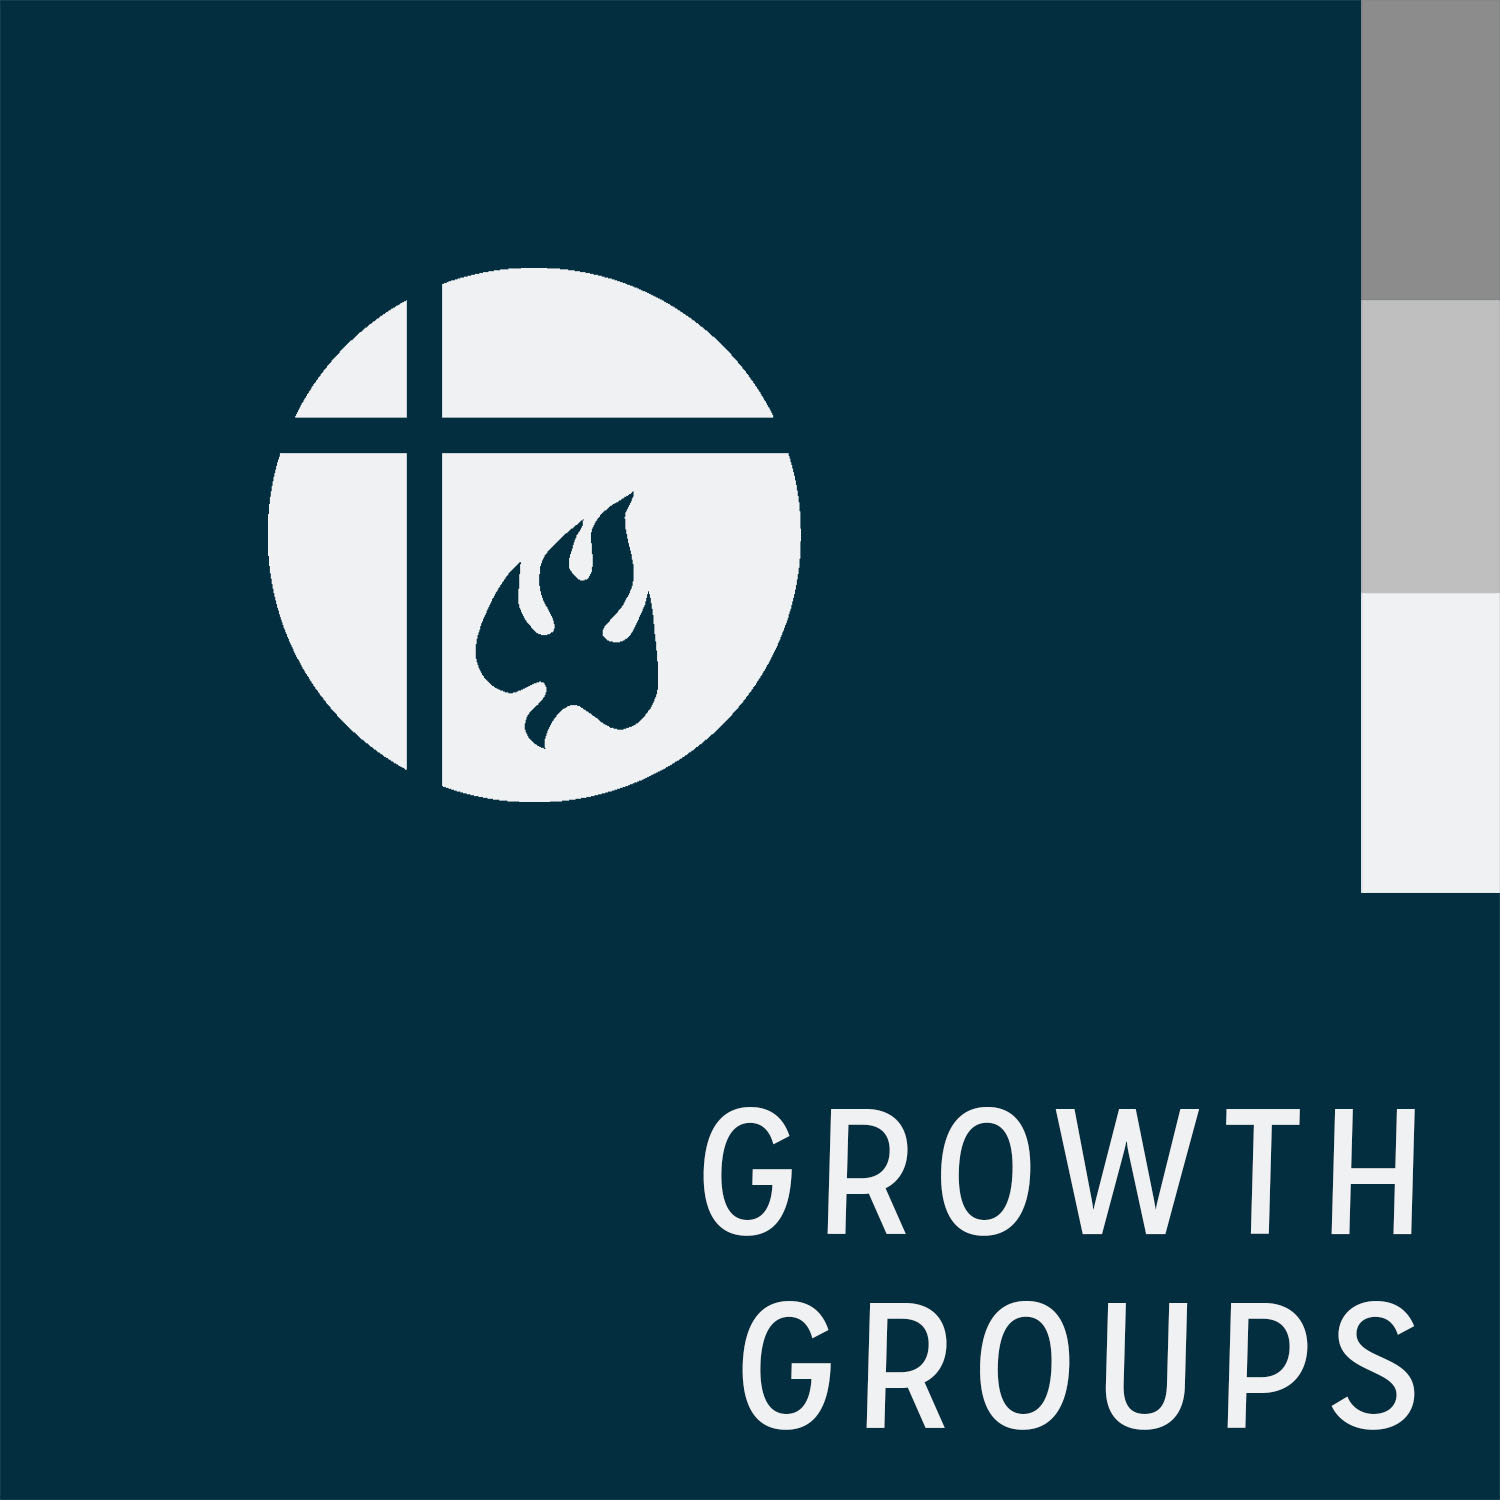 Artwork for Indianola First Growth Groups